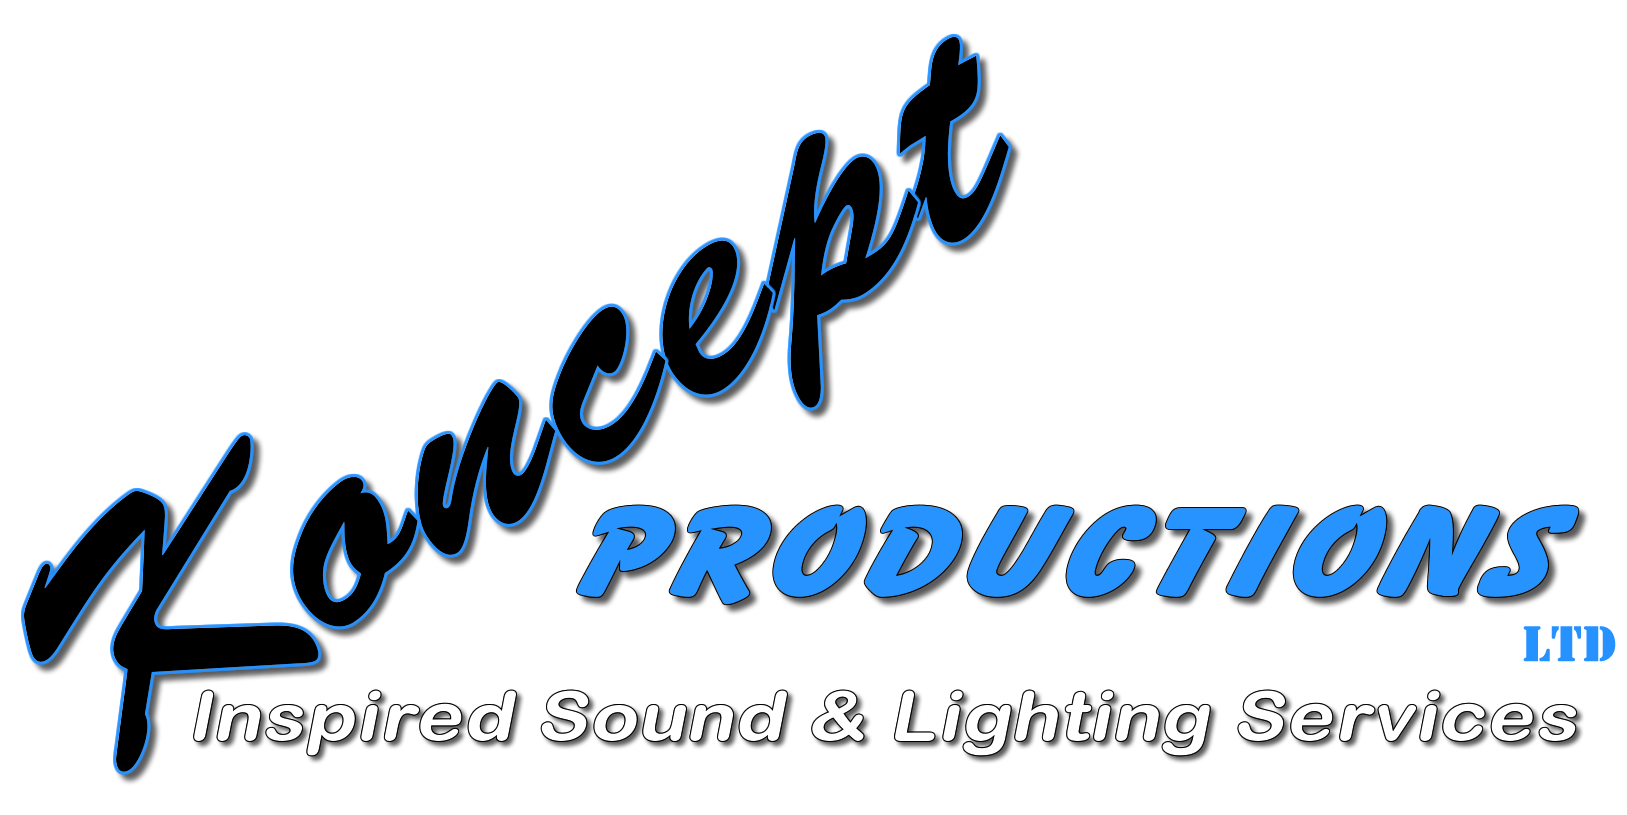 Logo of Koncept Productions Ltd Stage Equipment In Shefford, Bedfordshire